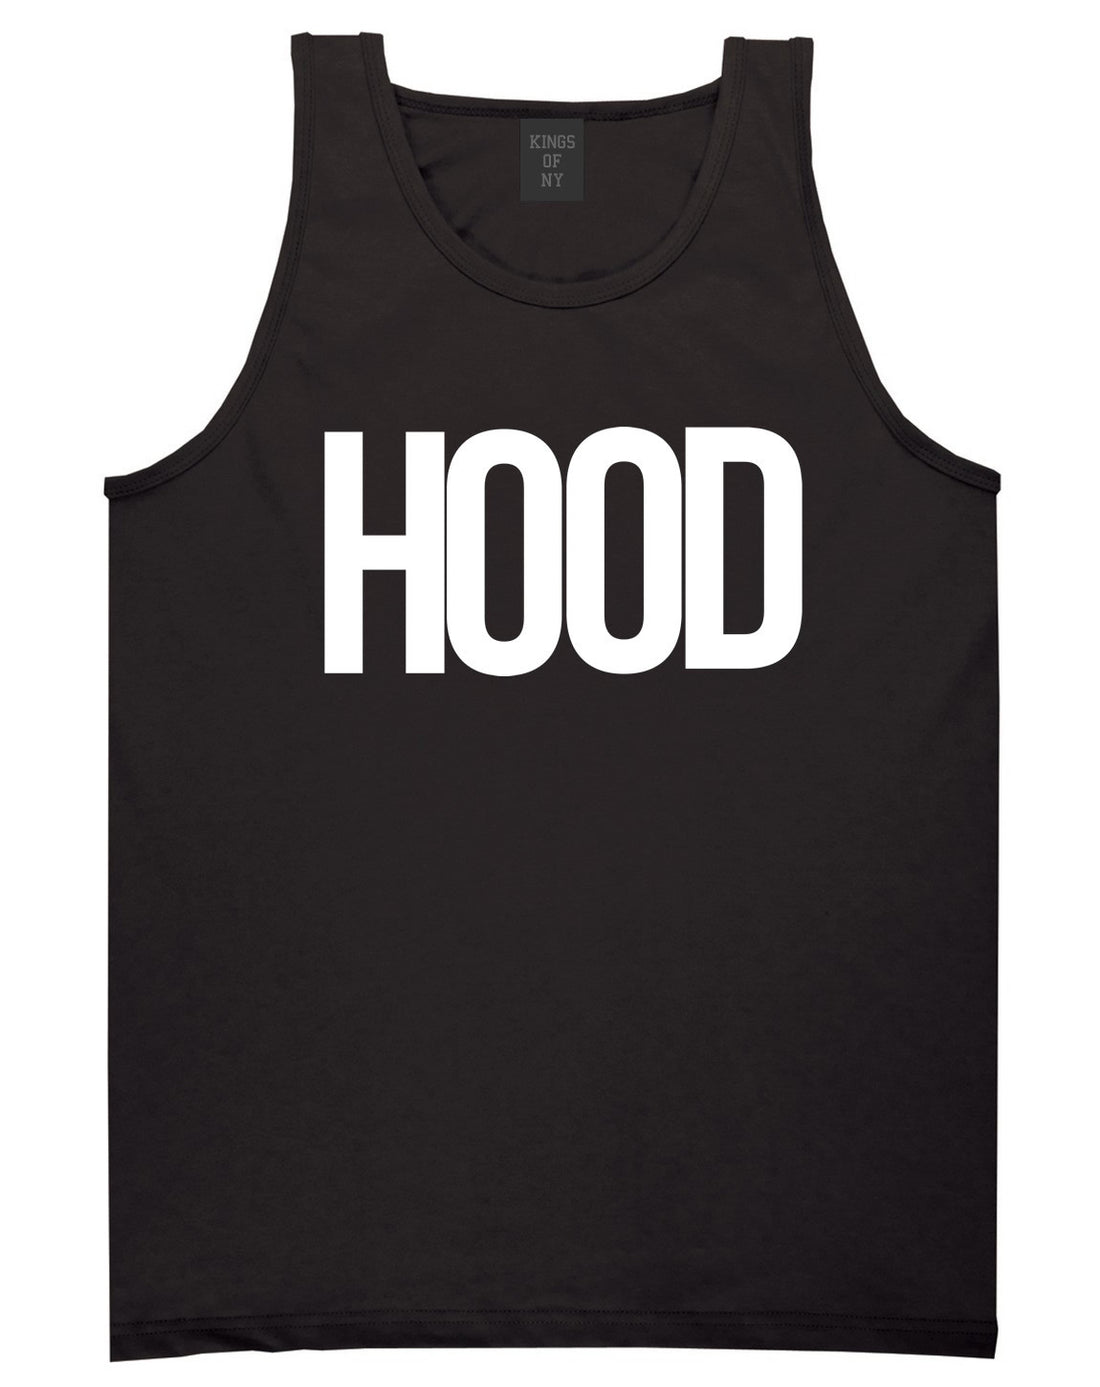 Hood Trap Style Compton New York Air Tank Top In Black by Kings Of NY